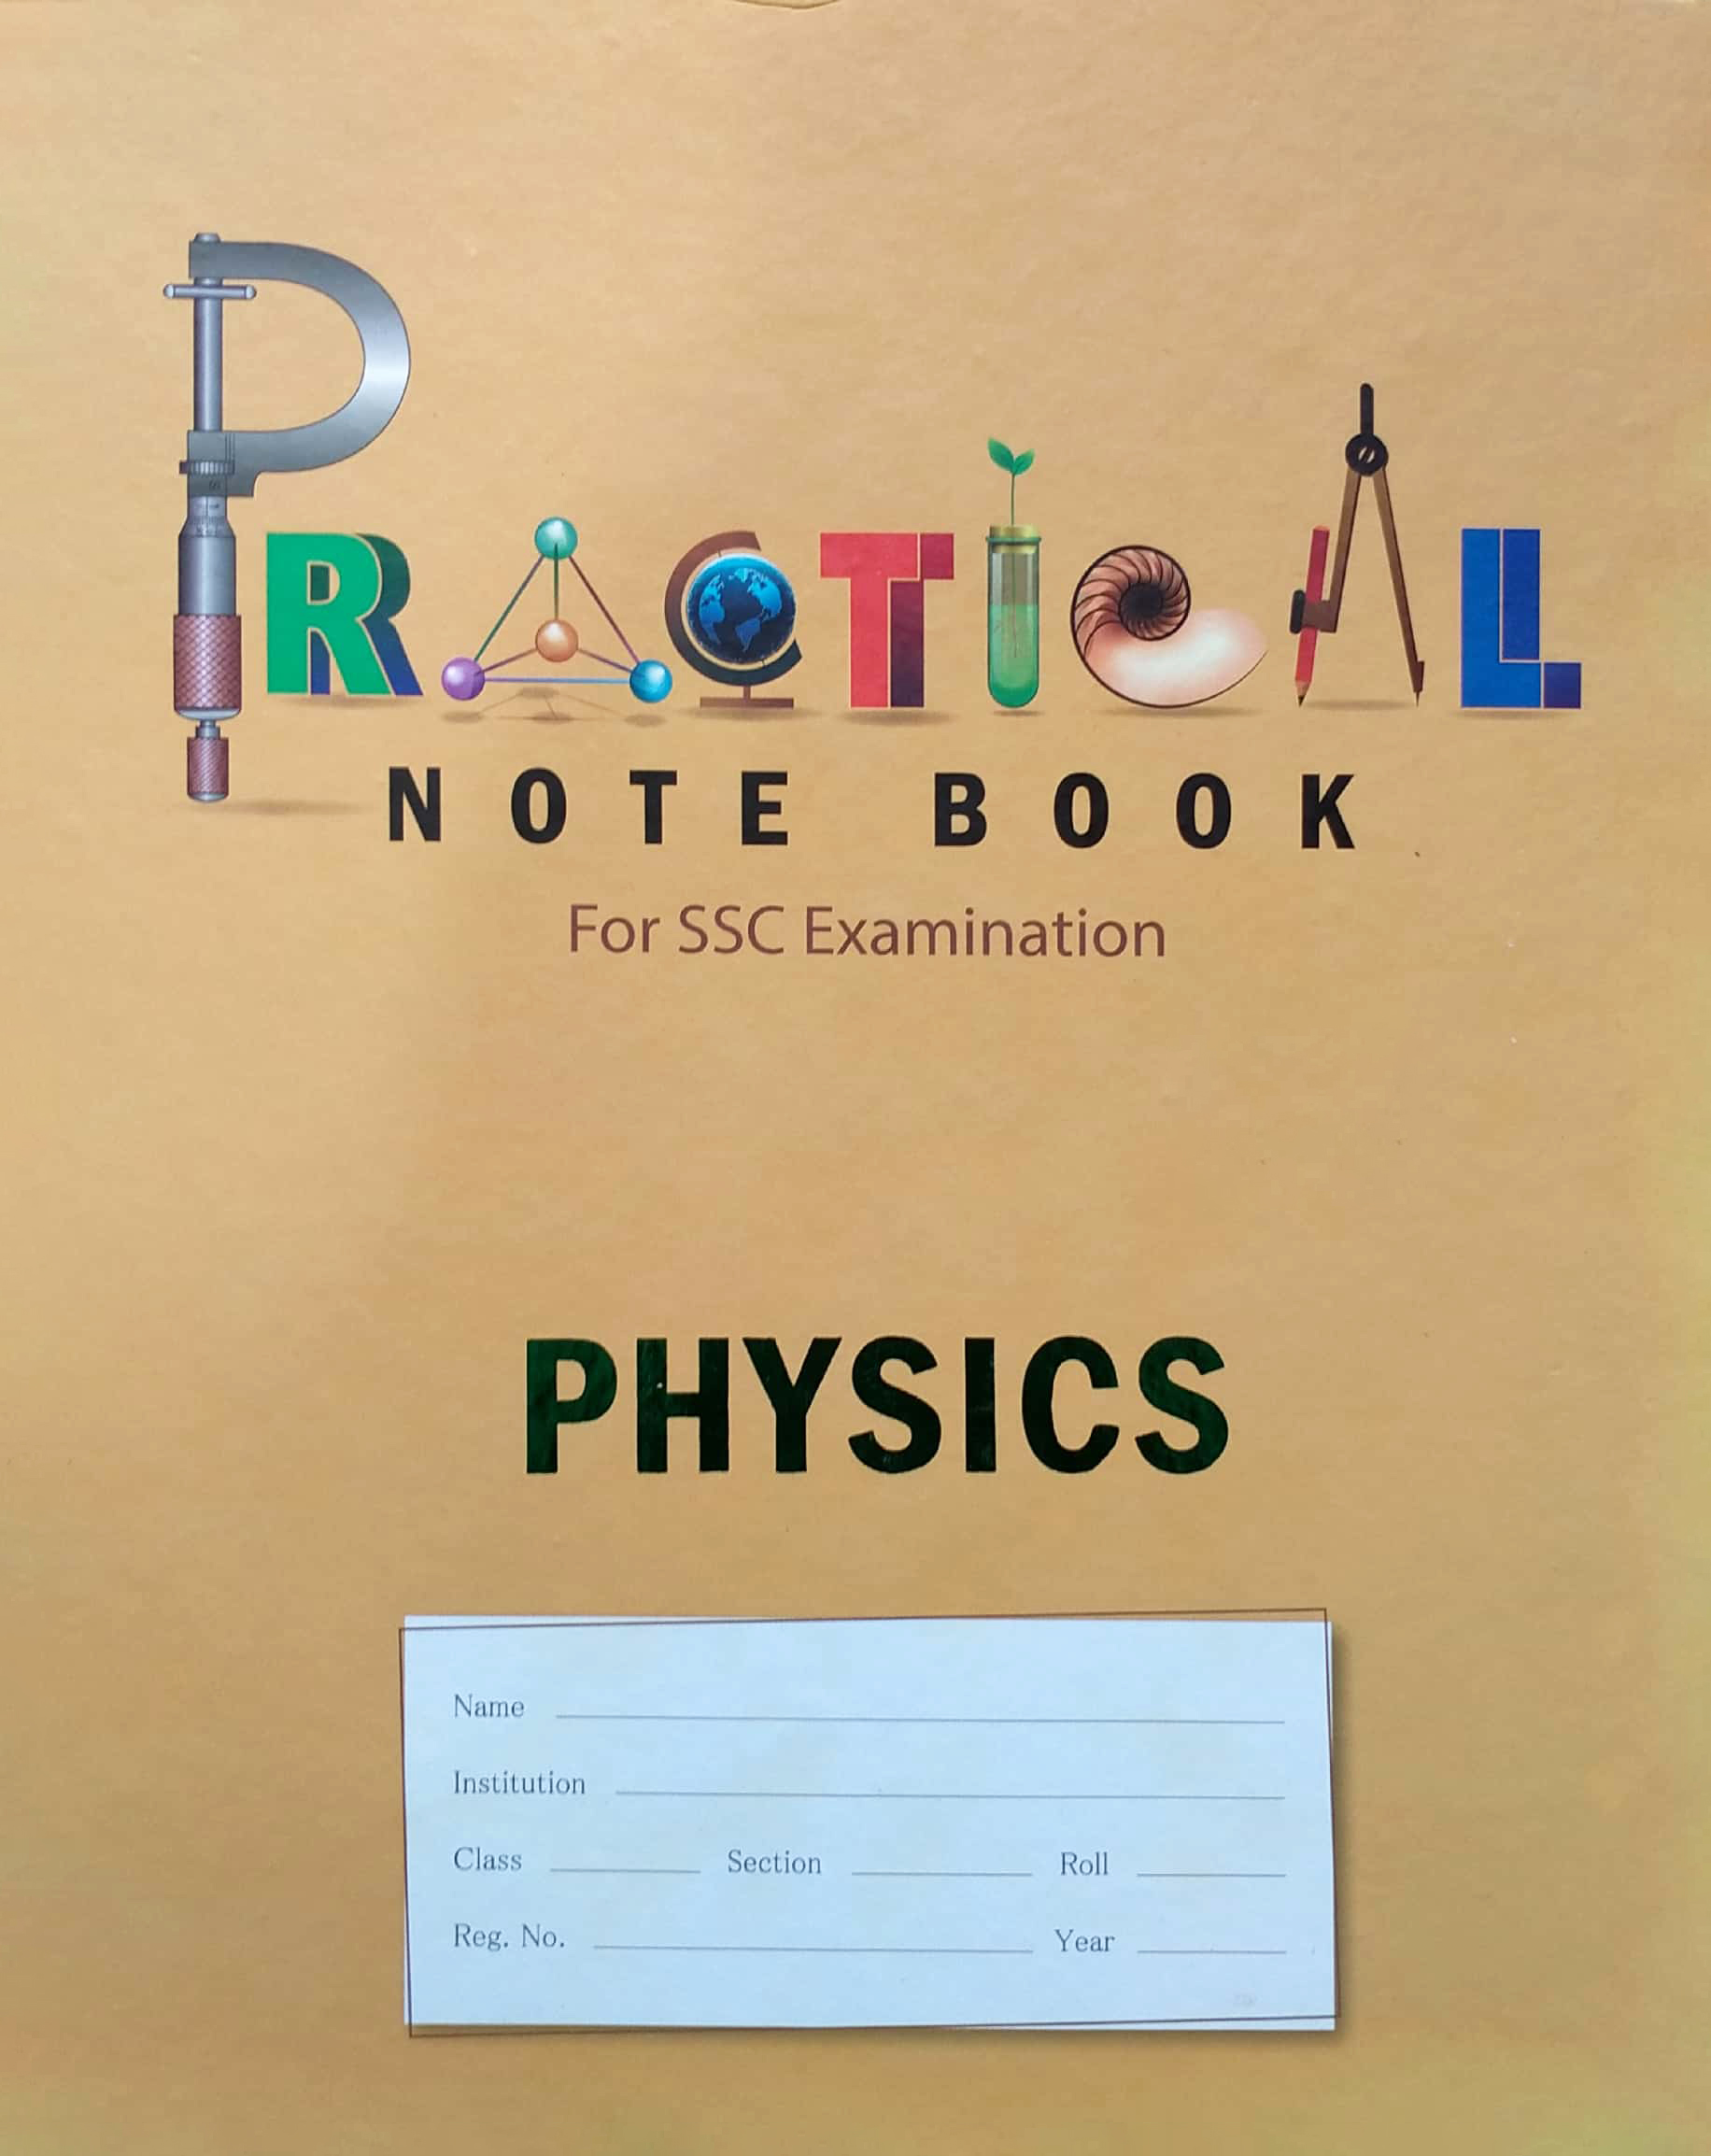 SSC Practical Note Book Physics 